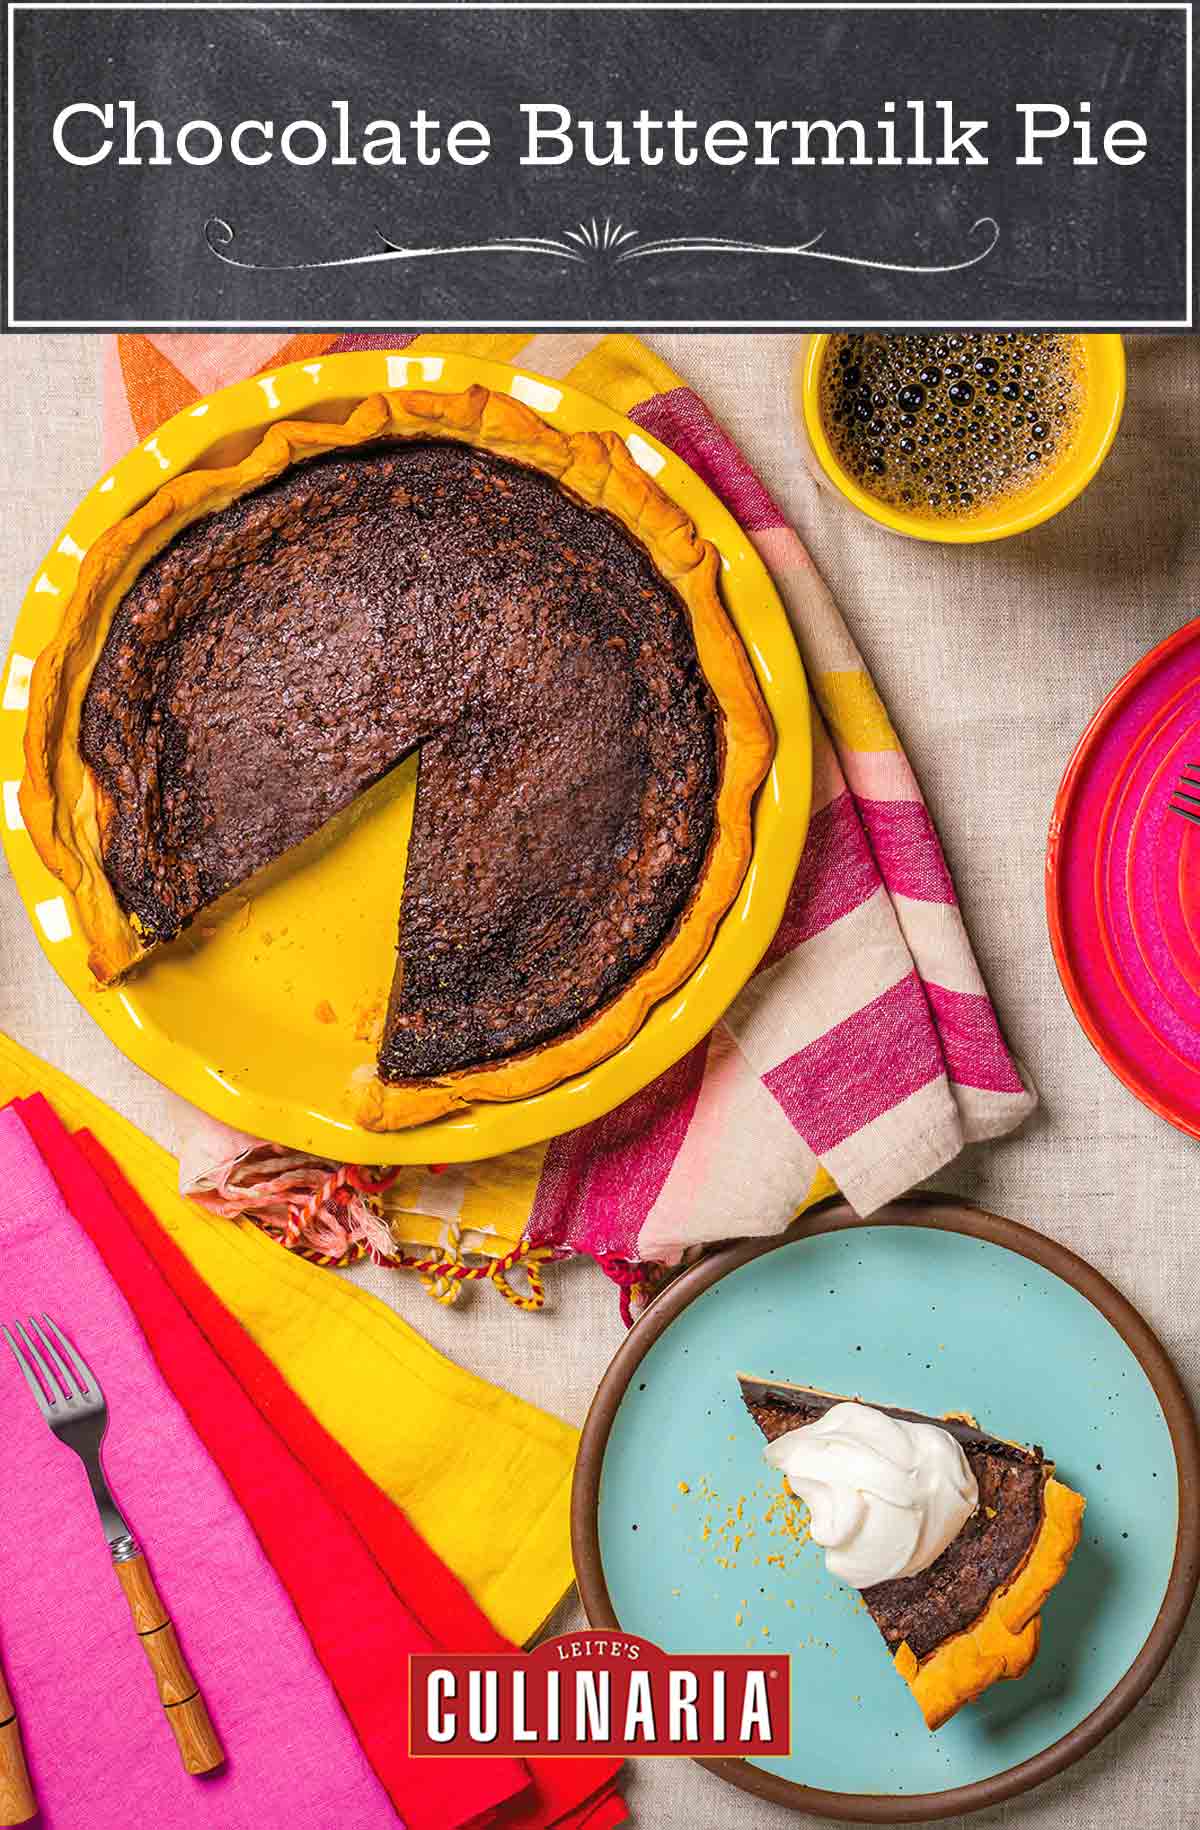 A table with colourful napkins, a plate with a slice of pie , a cup of coffee, and a yellow pie plate with a chocolate buttermilk pie that's missing one slice.